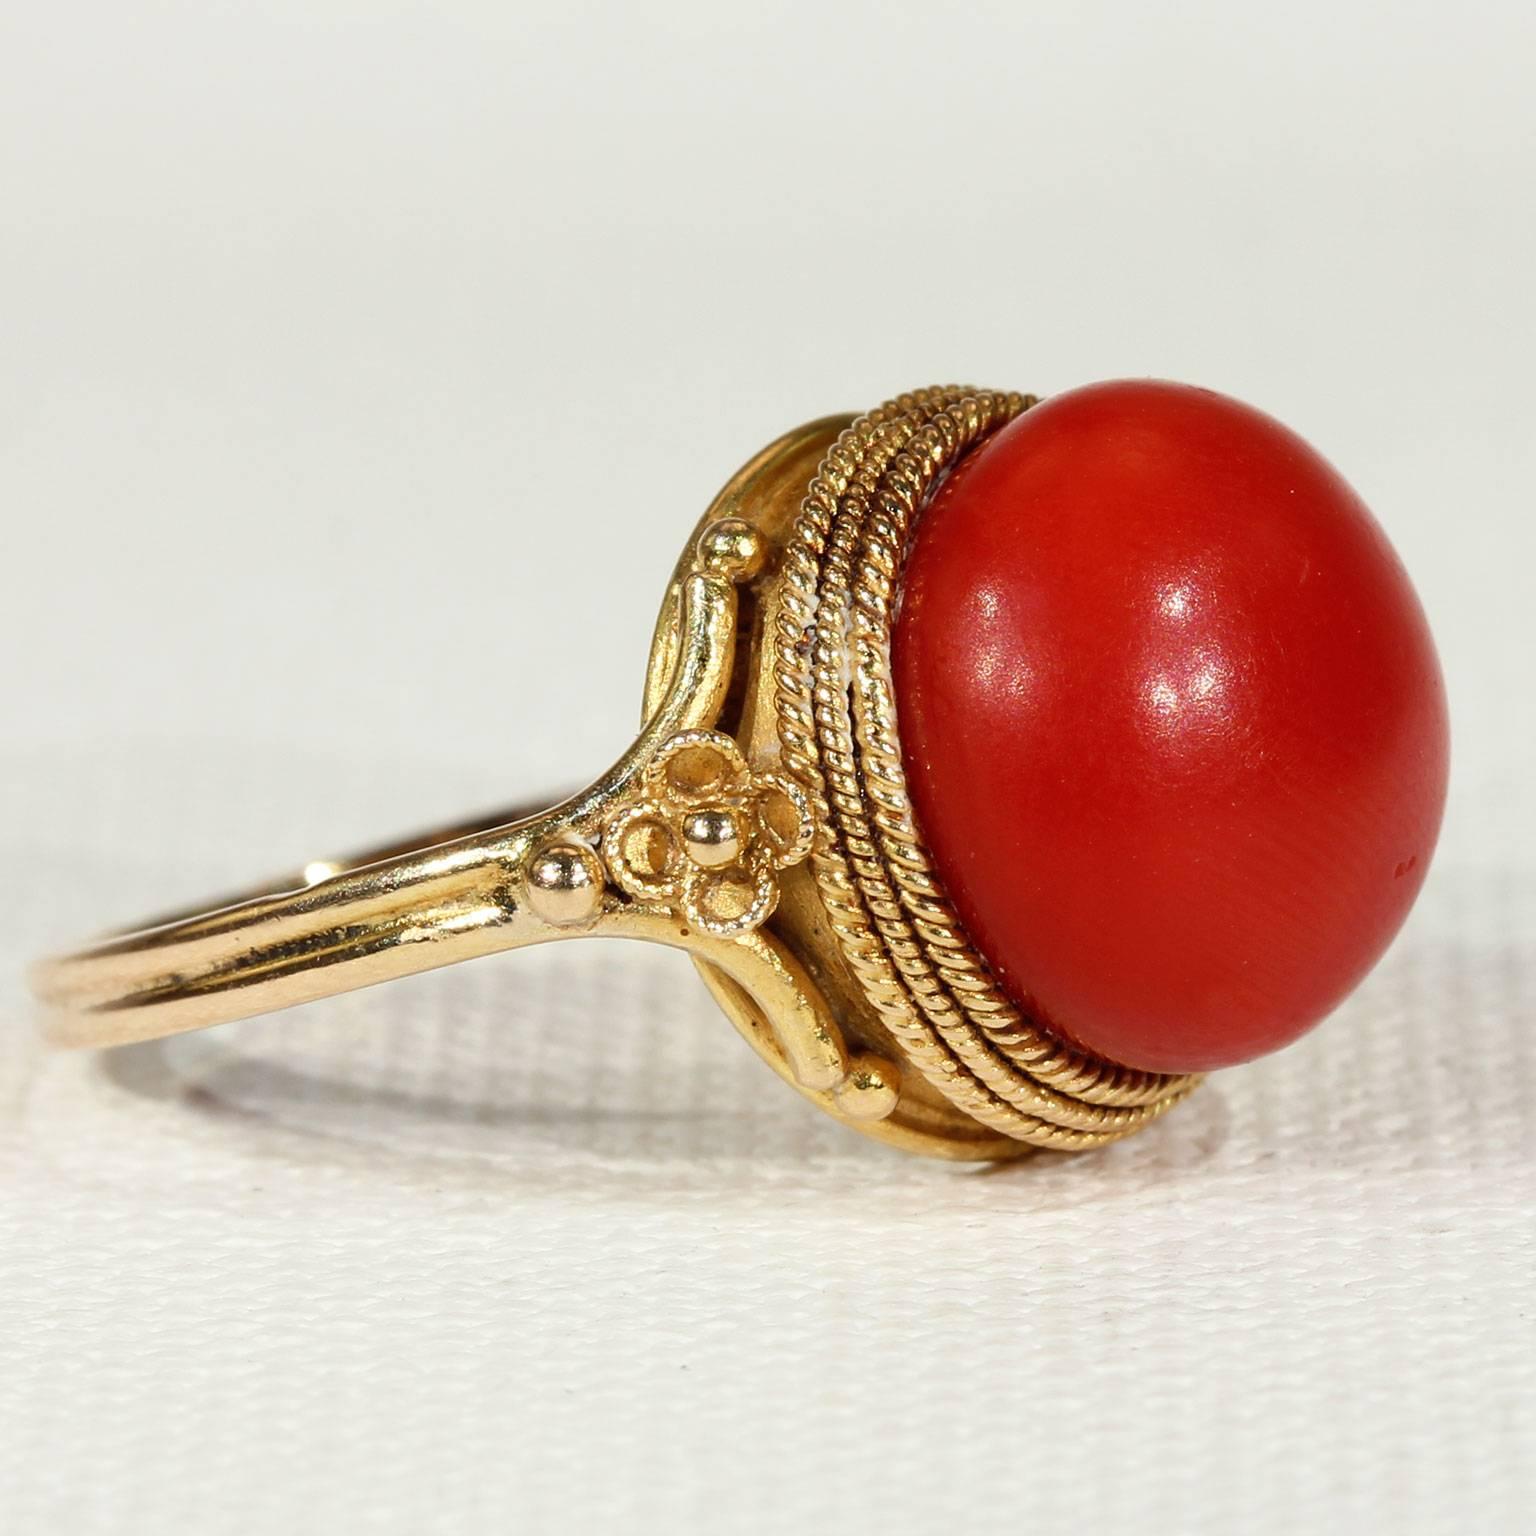 This rare antique Victorian Etruscan Revival style red coral button ring was handcrafted around 1870. It is circled thrice around with twisted golden wirework and accented with golden beads. The large lozenge of coral measures 12 mm in diameter.